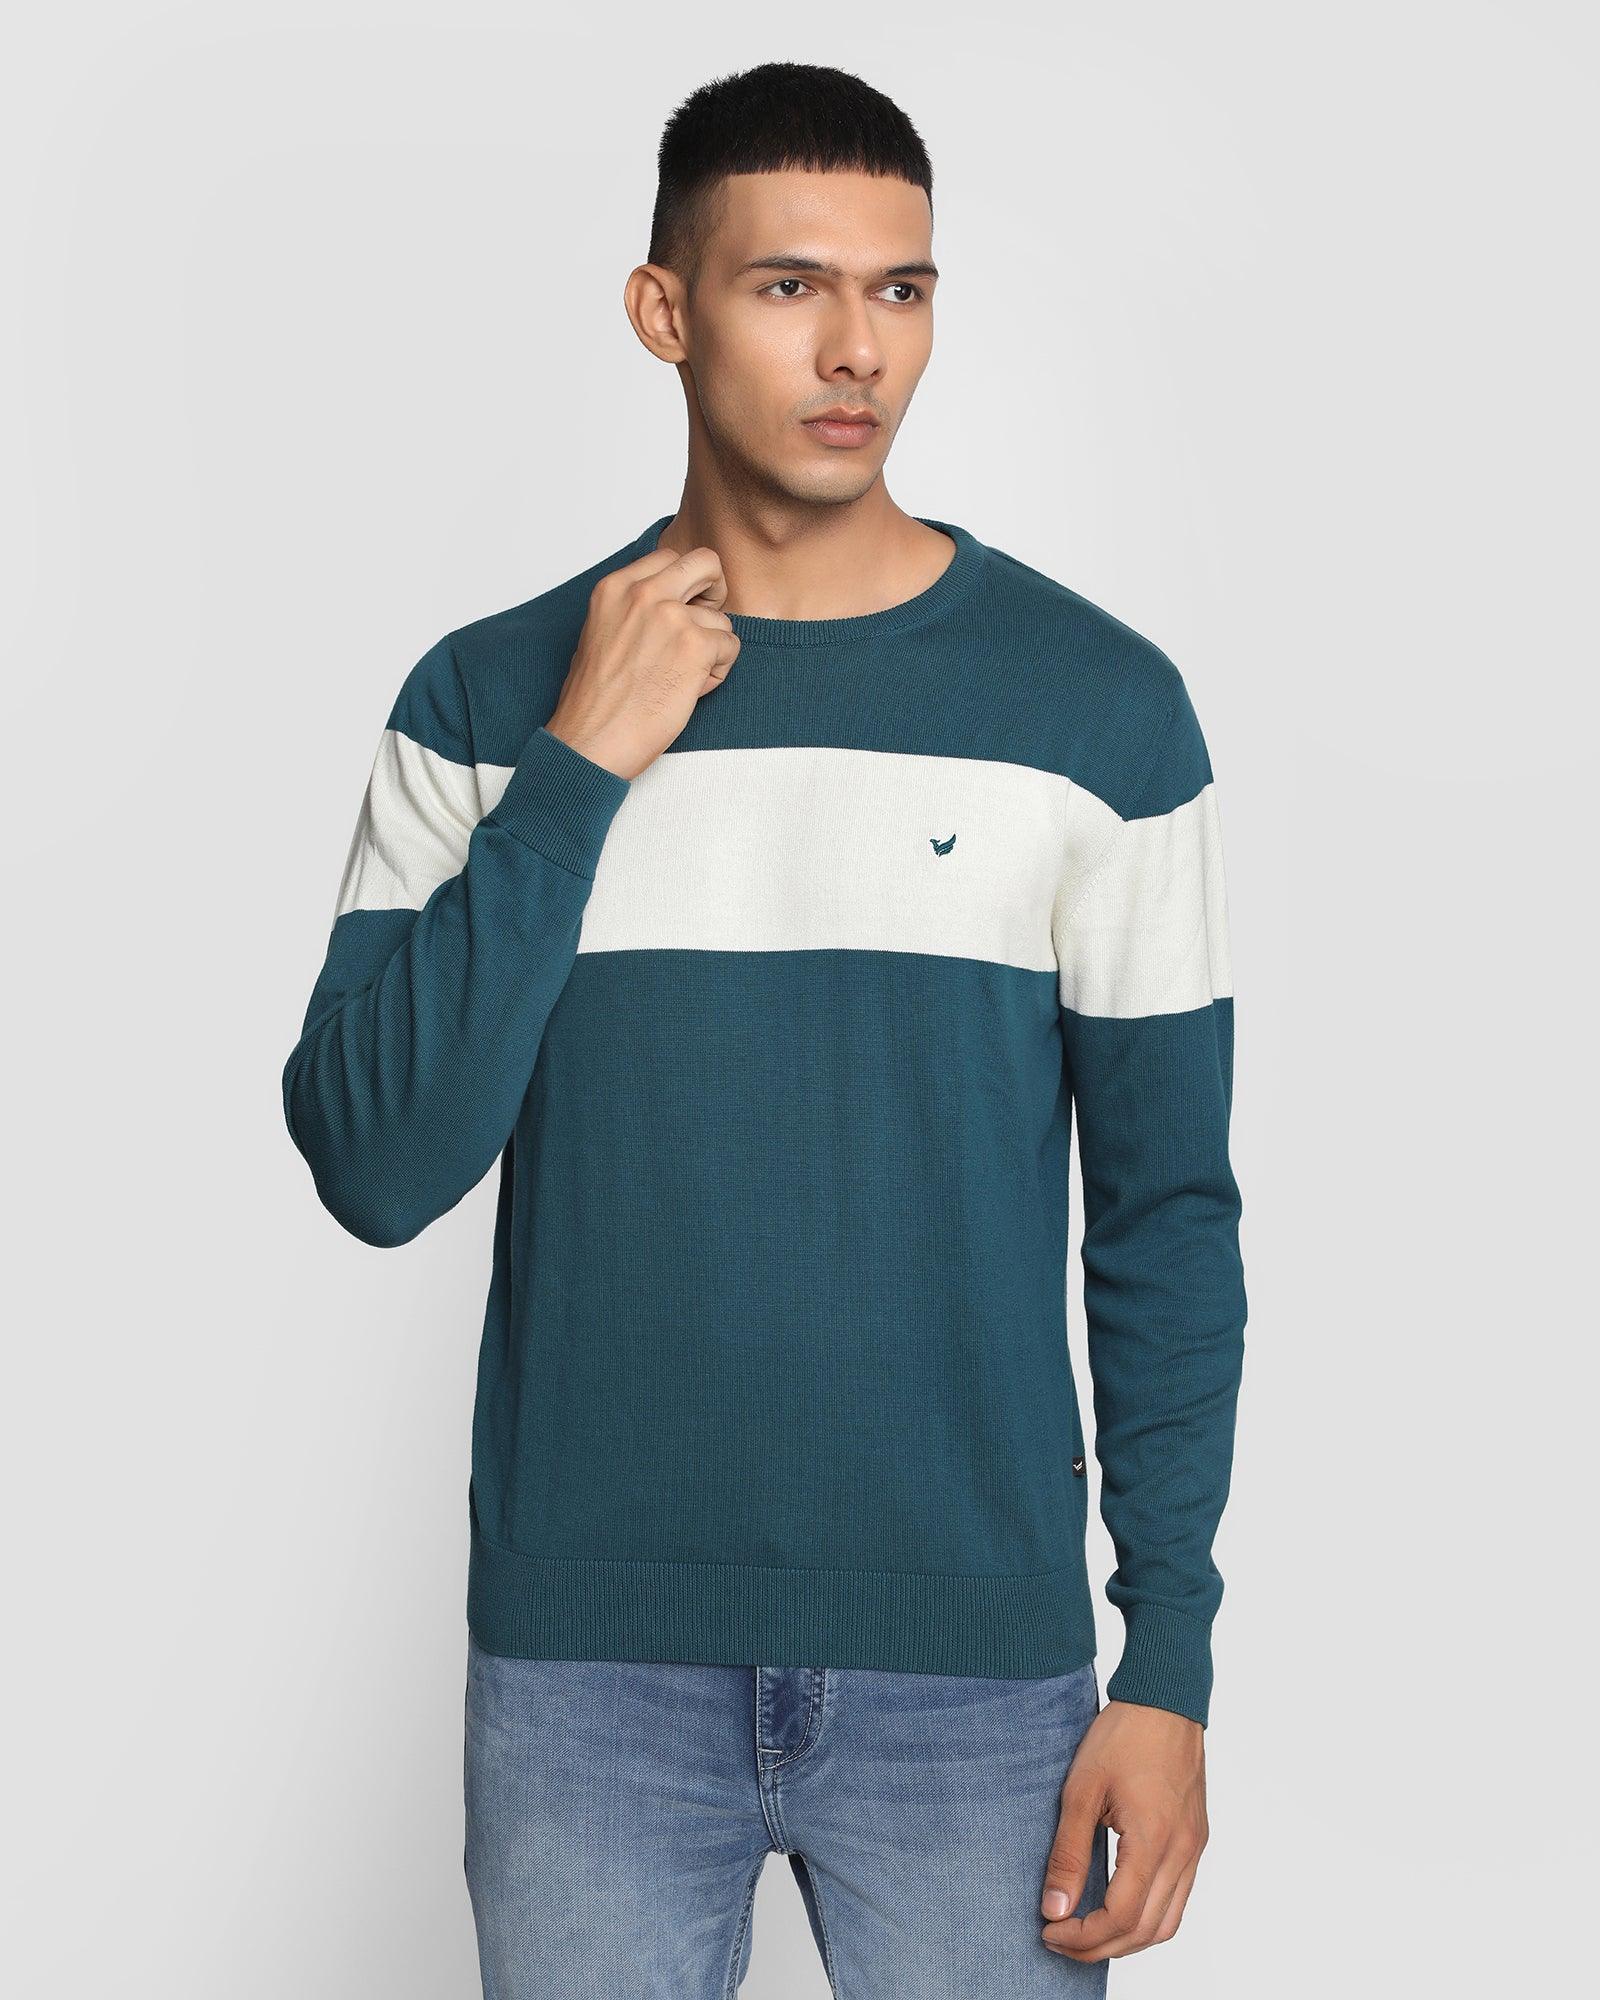 Crew Neck Teal Green Solid Sweater - Everet